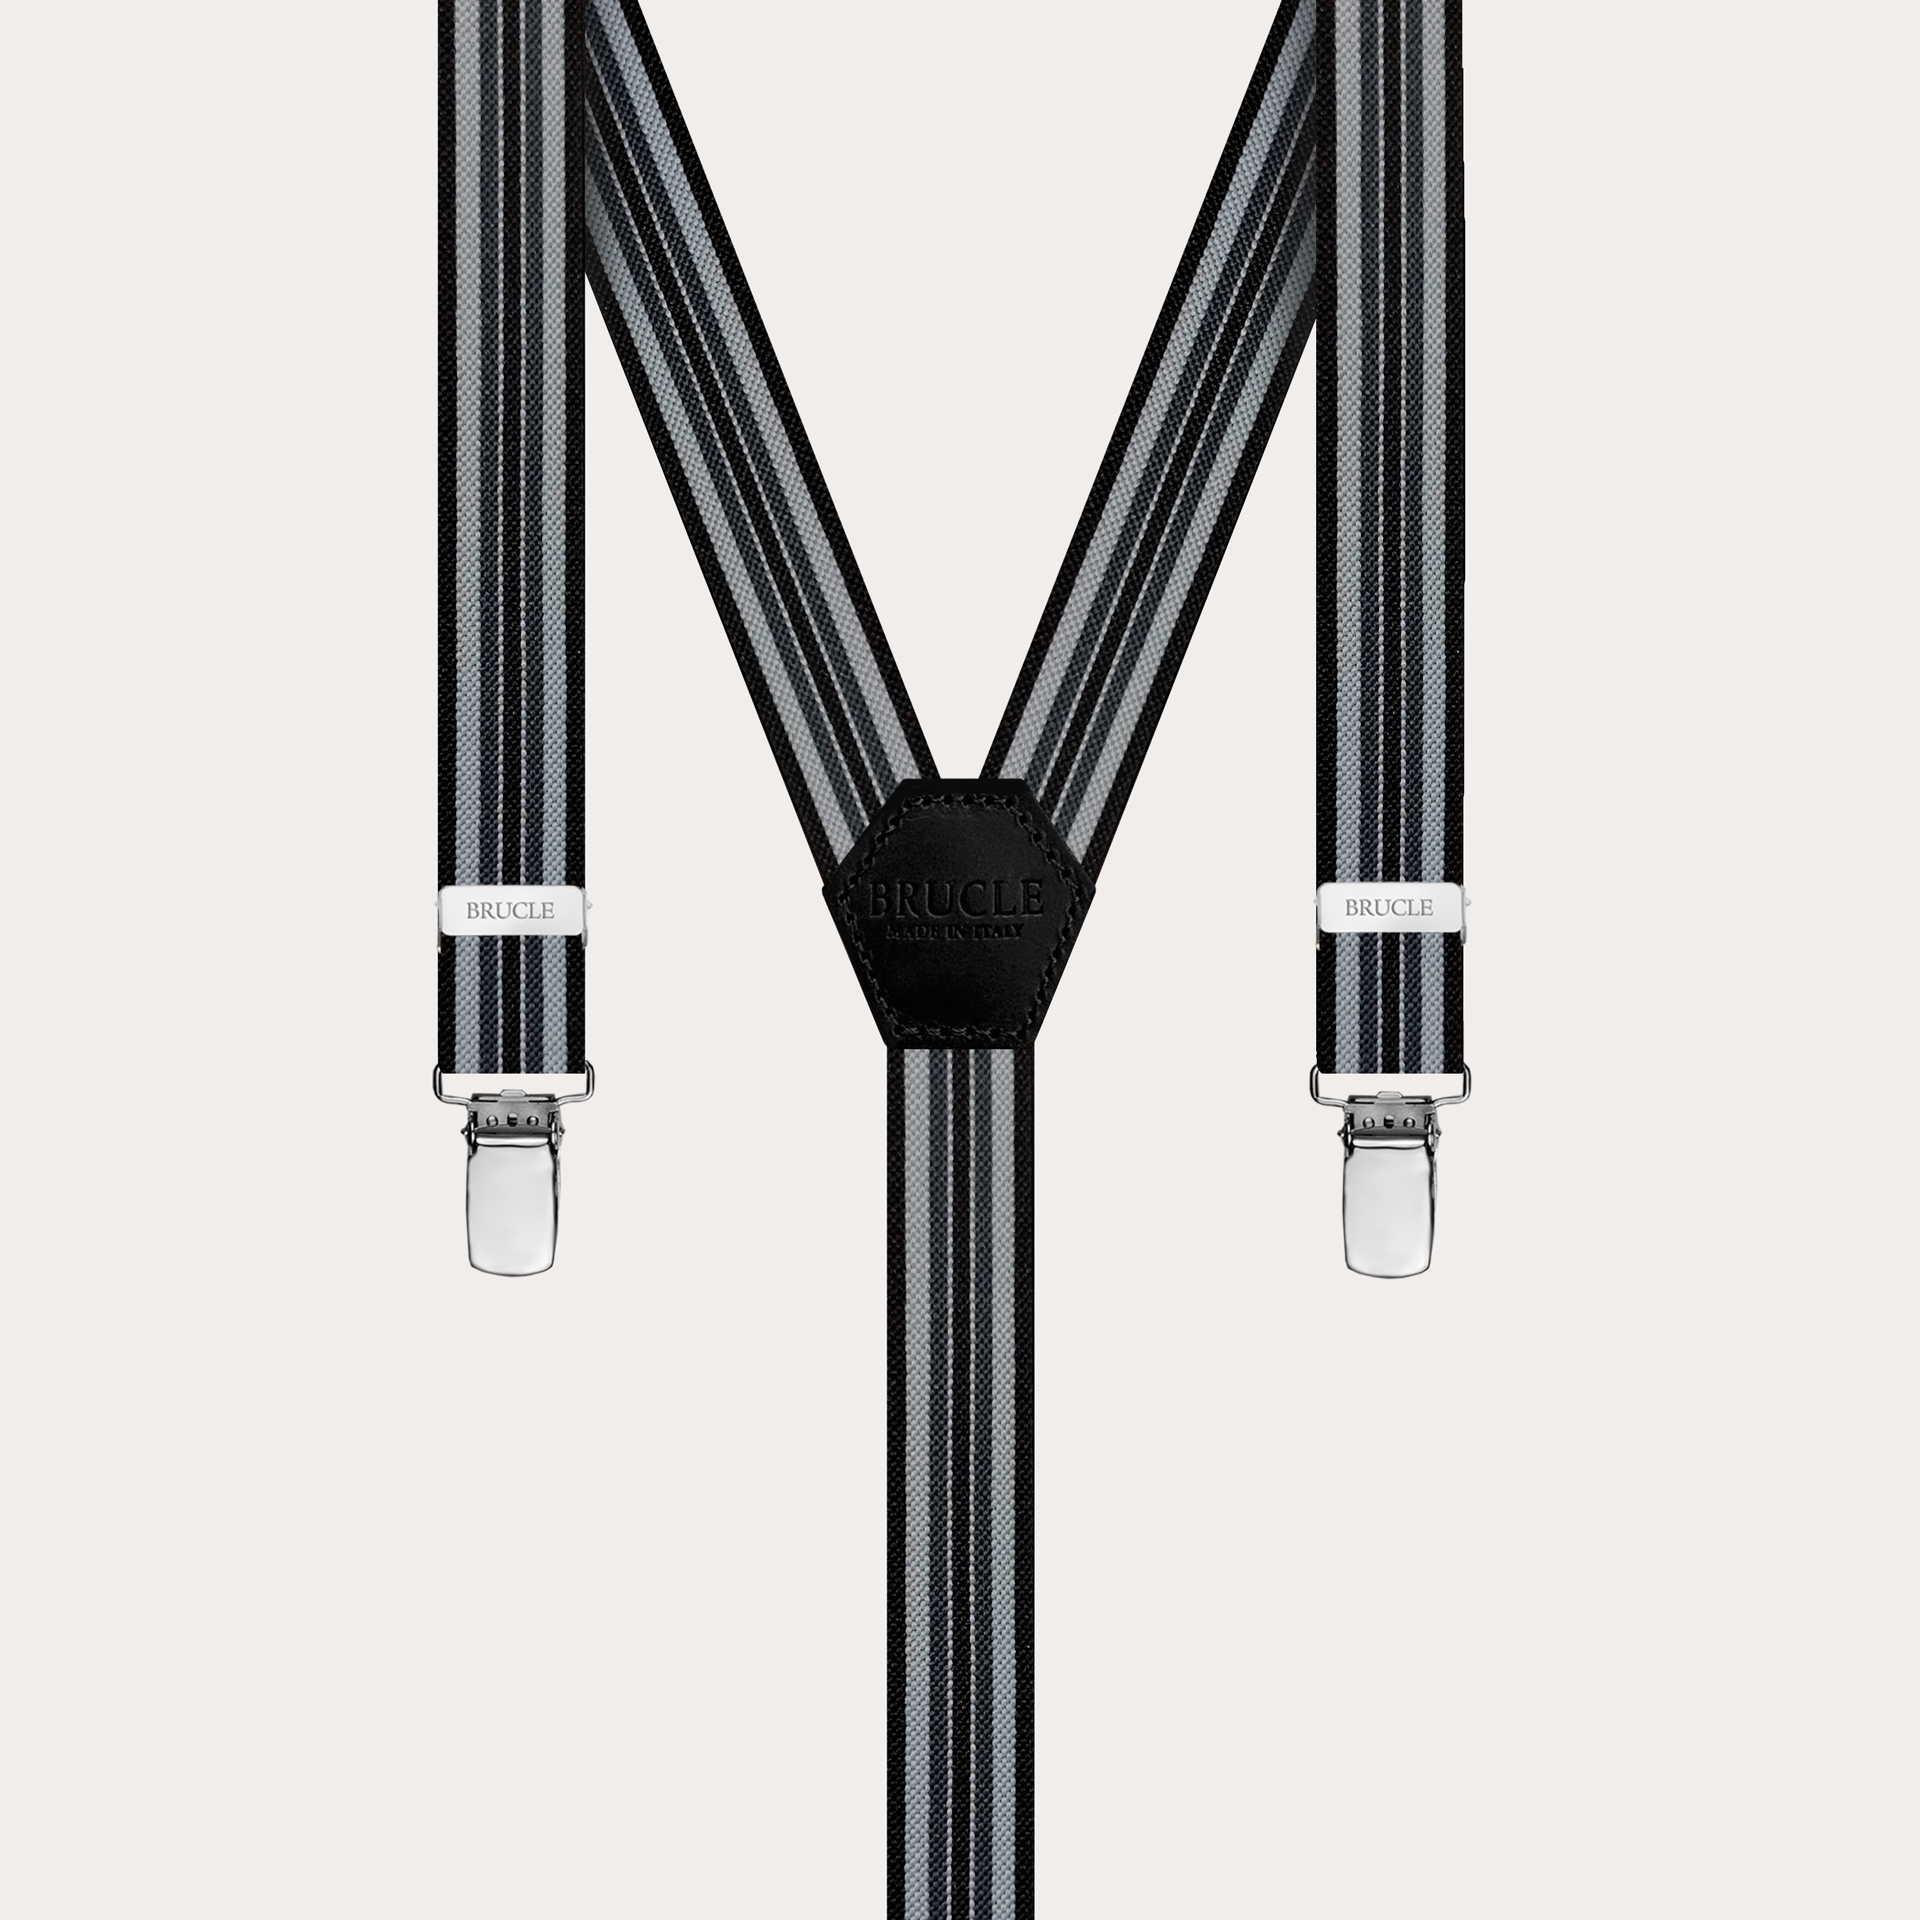 BRUCLE Thin unisex suspenders, black and grey